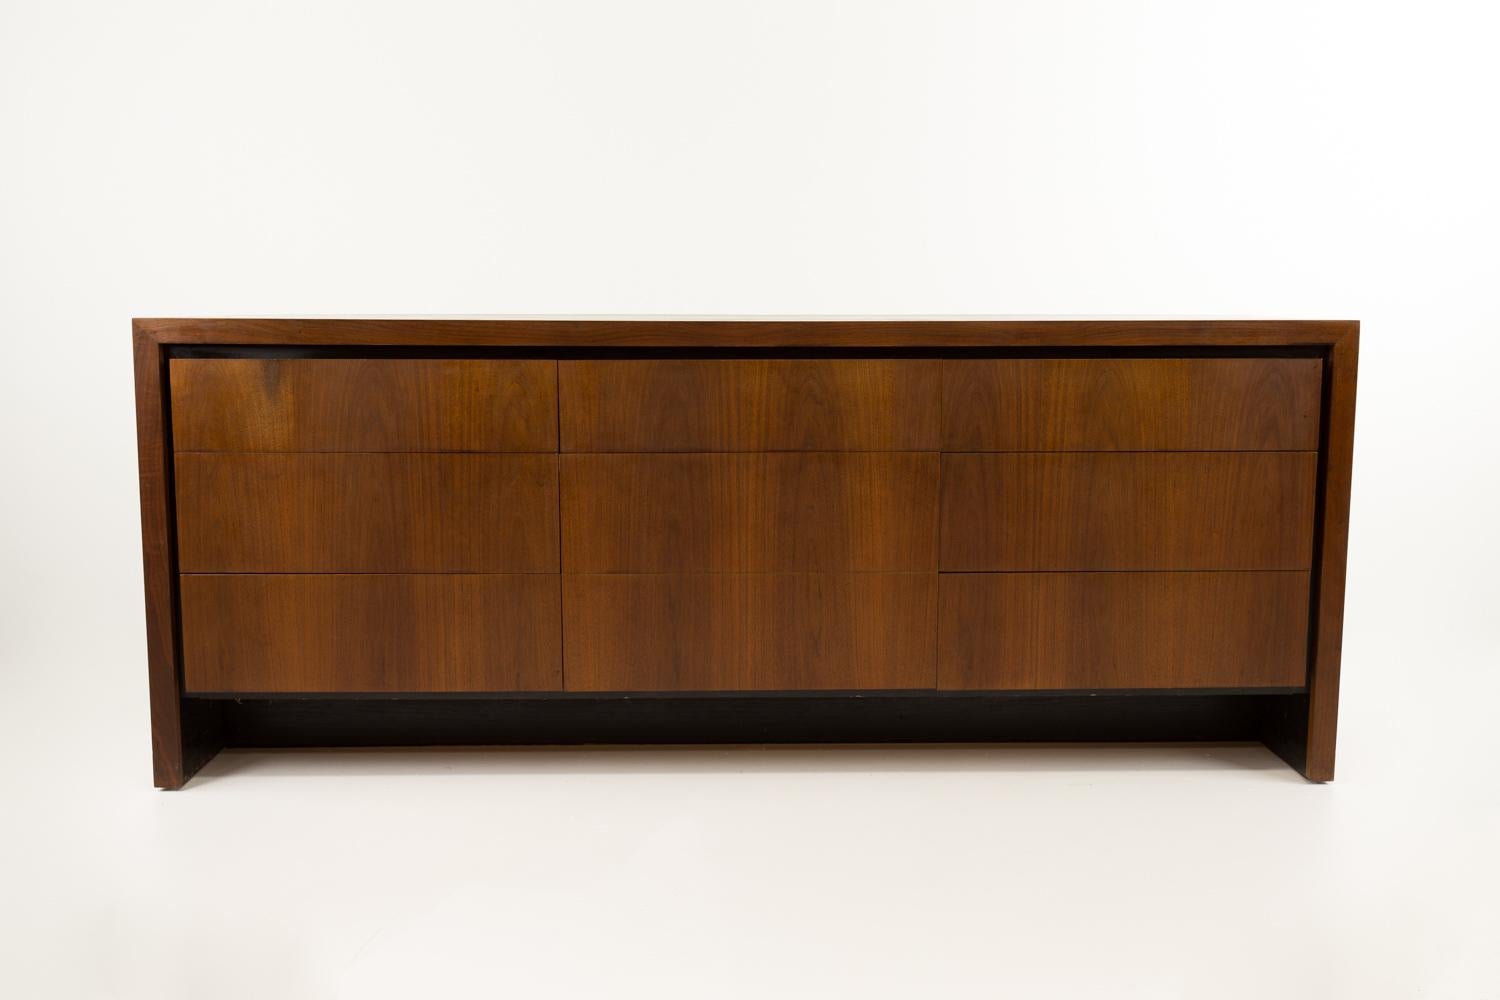 Merton Gershun for Dillingham mid century walnut lowboy dresser
Dresser measures: 74 long x 19 deep x 29.5 inches high

All pieces of furniture can be had in what we call restored vintage condition. That means the piece is restored upon purchase